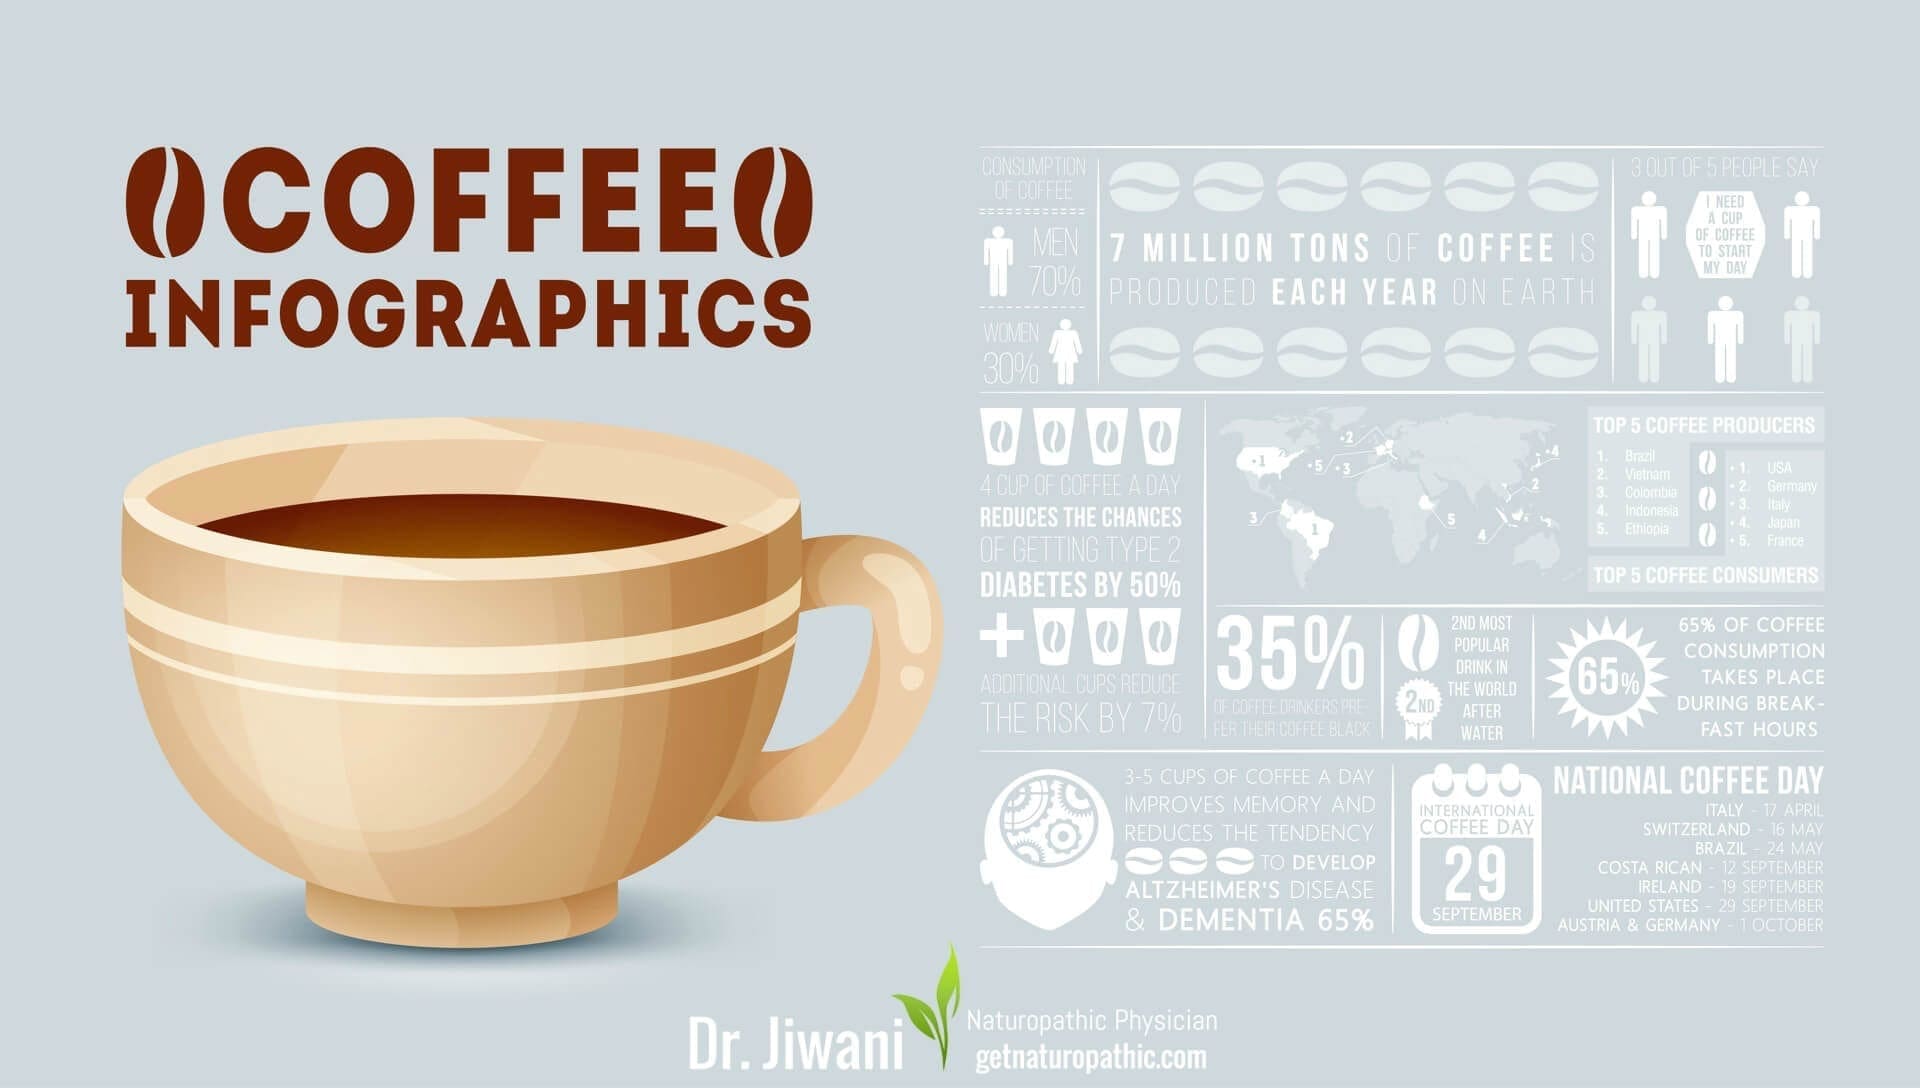 Confused about Coffee? The Good, Bad & Ugly about Caffeine & this BitterSweet Beverage | Dr. Jiwani's Naturopathic Nuggets Blog